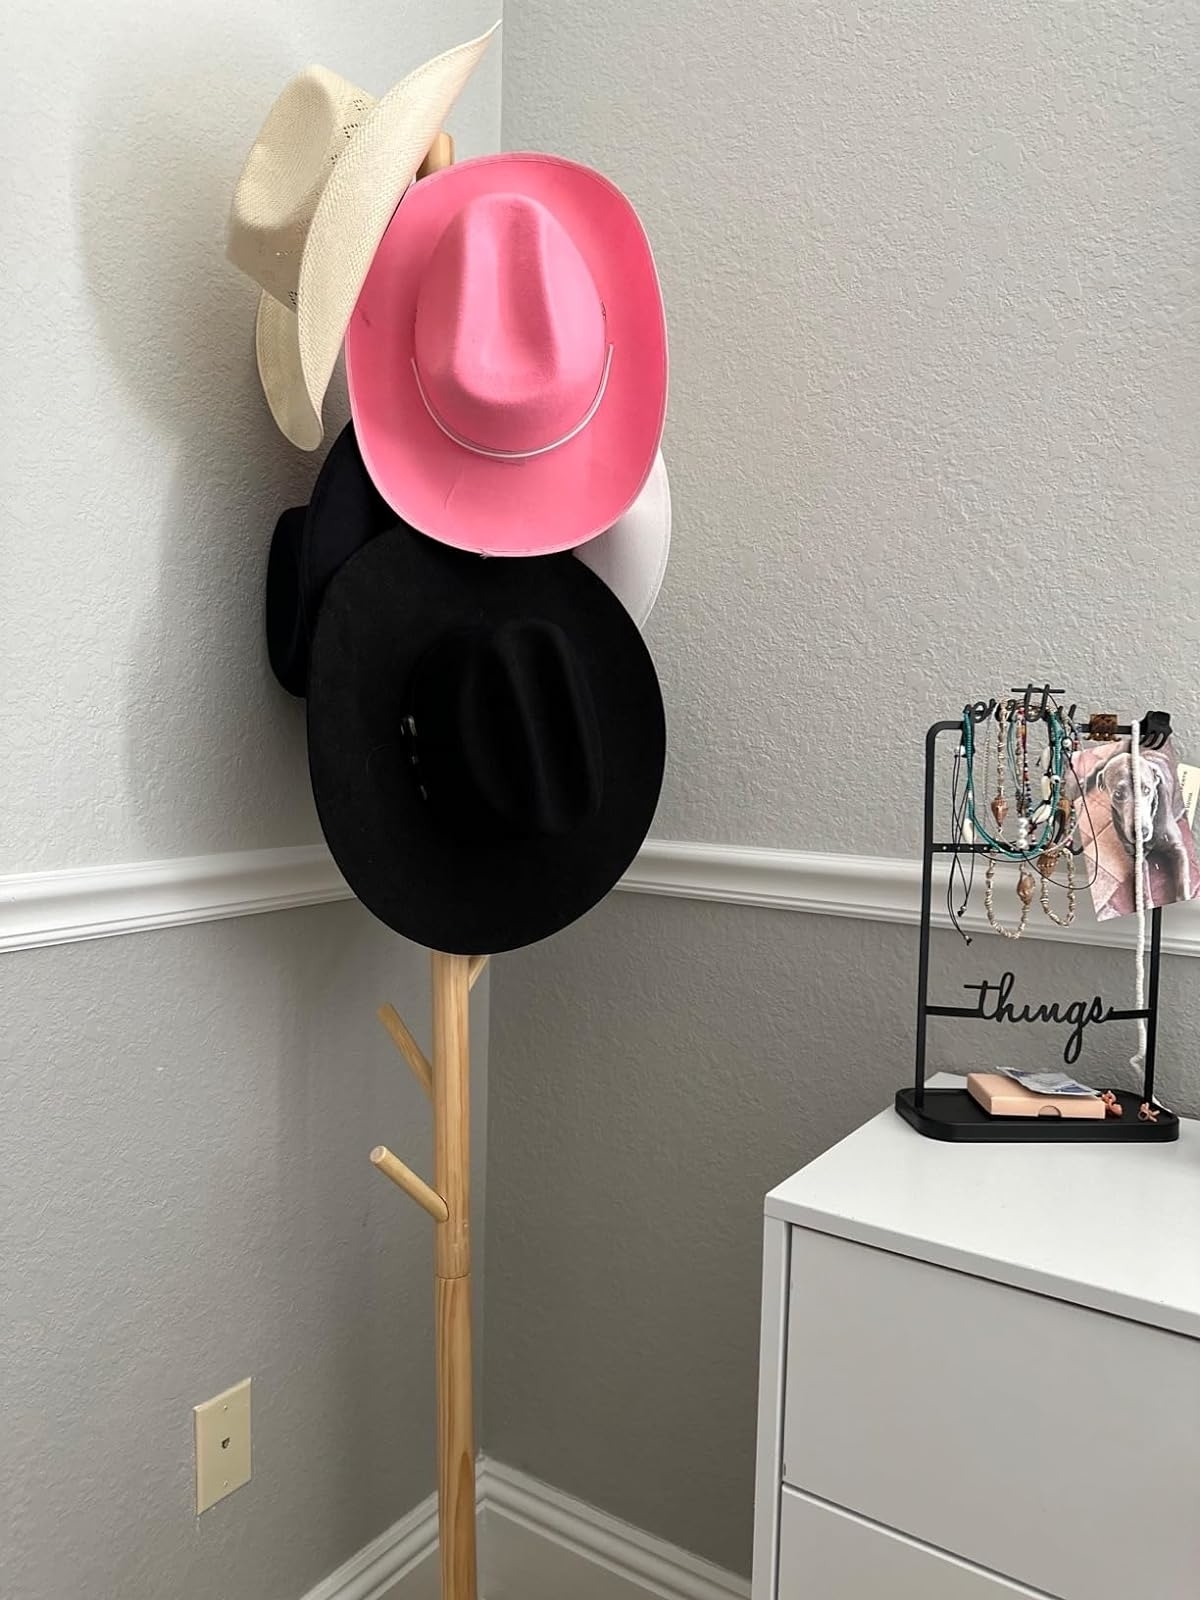 Reviewer image of the light wood coat rack with hats hanging on it in the corner of a room